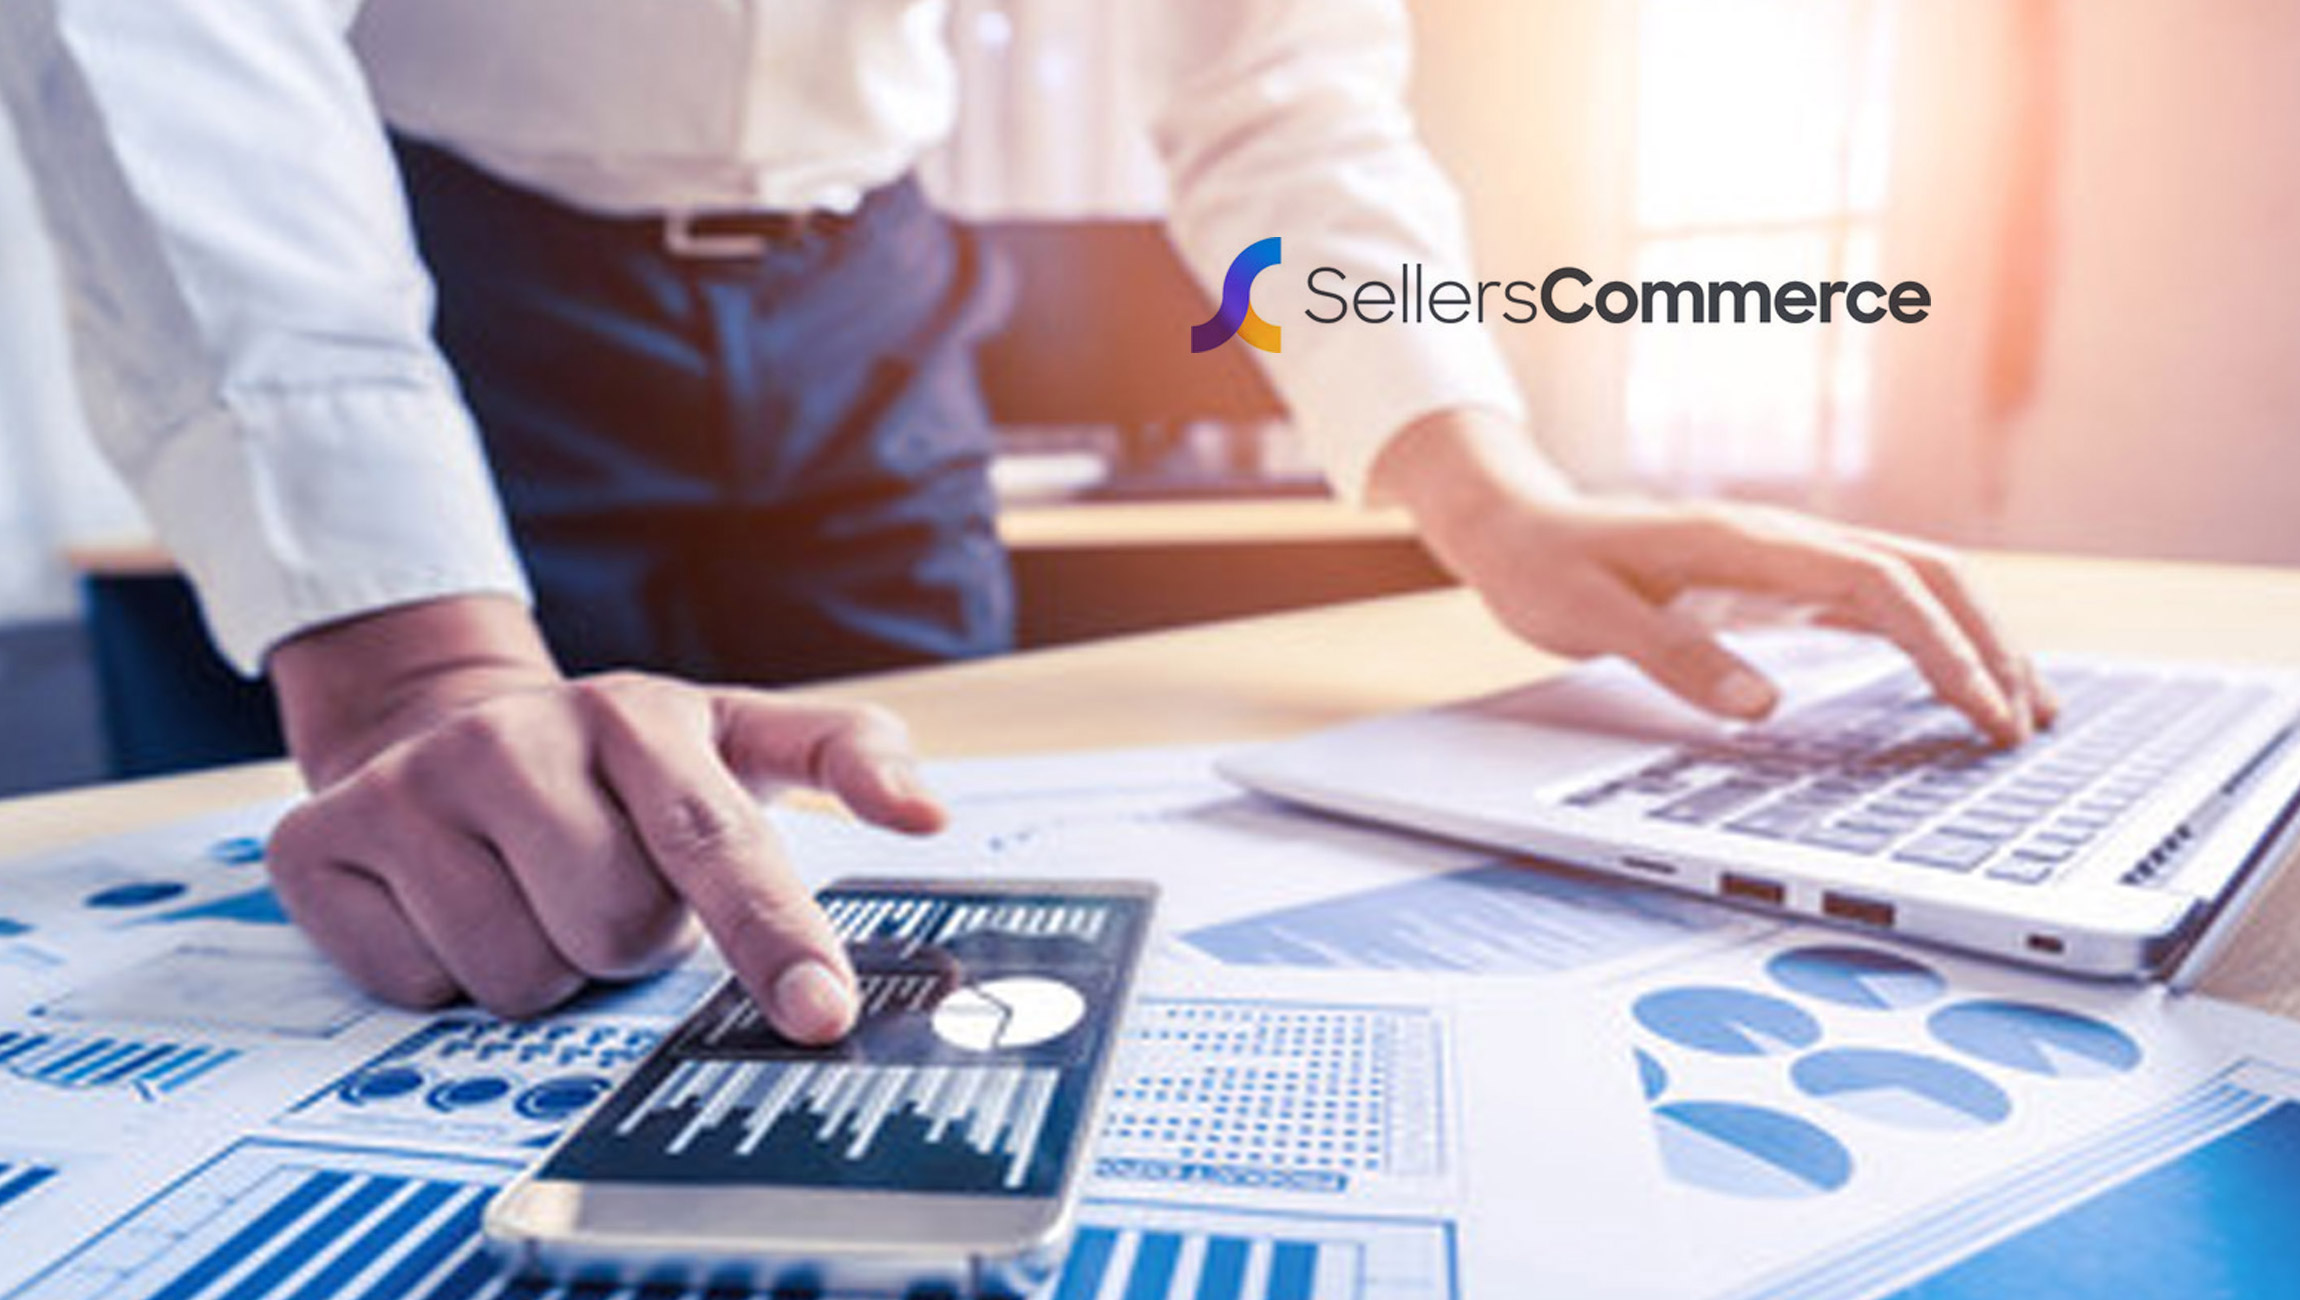 SellersCommerce Puts Pedal to the Metal; Plans to Double-down on Business Growth